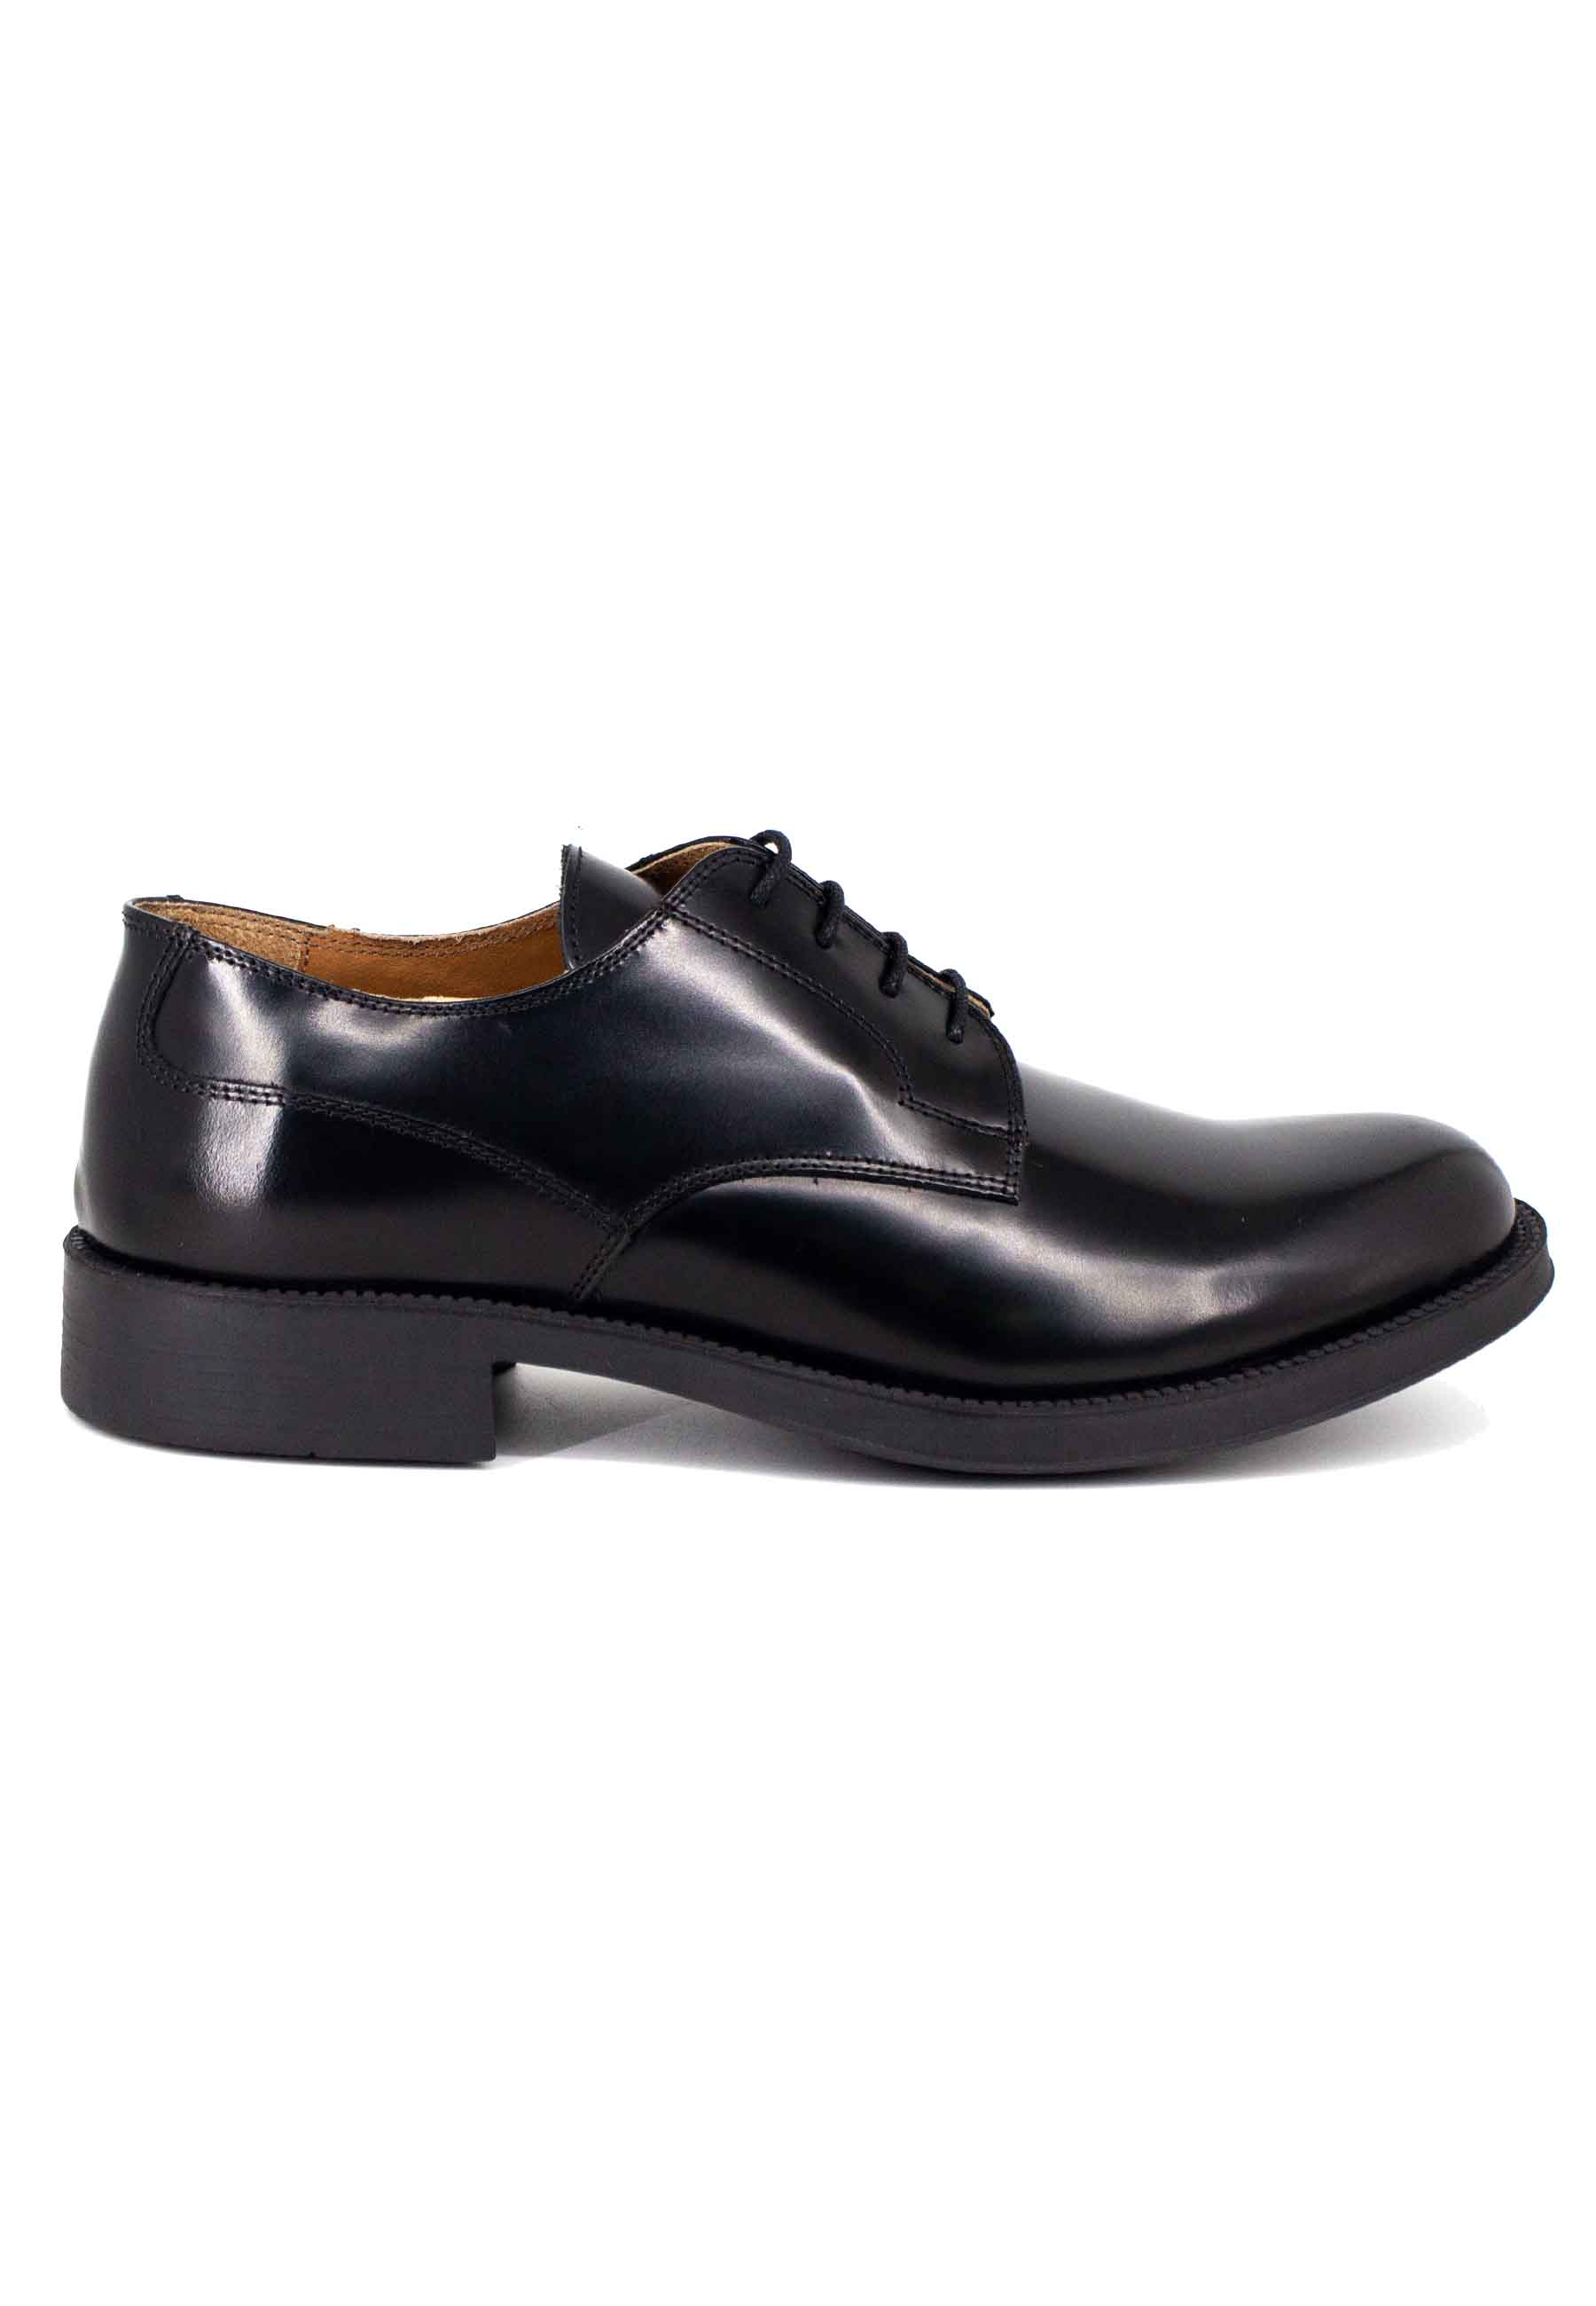 Men's lace-ups in black leather with rubber sole